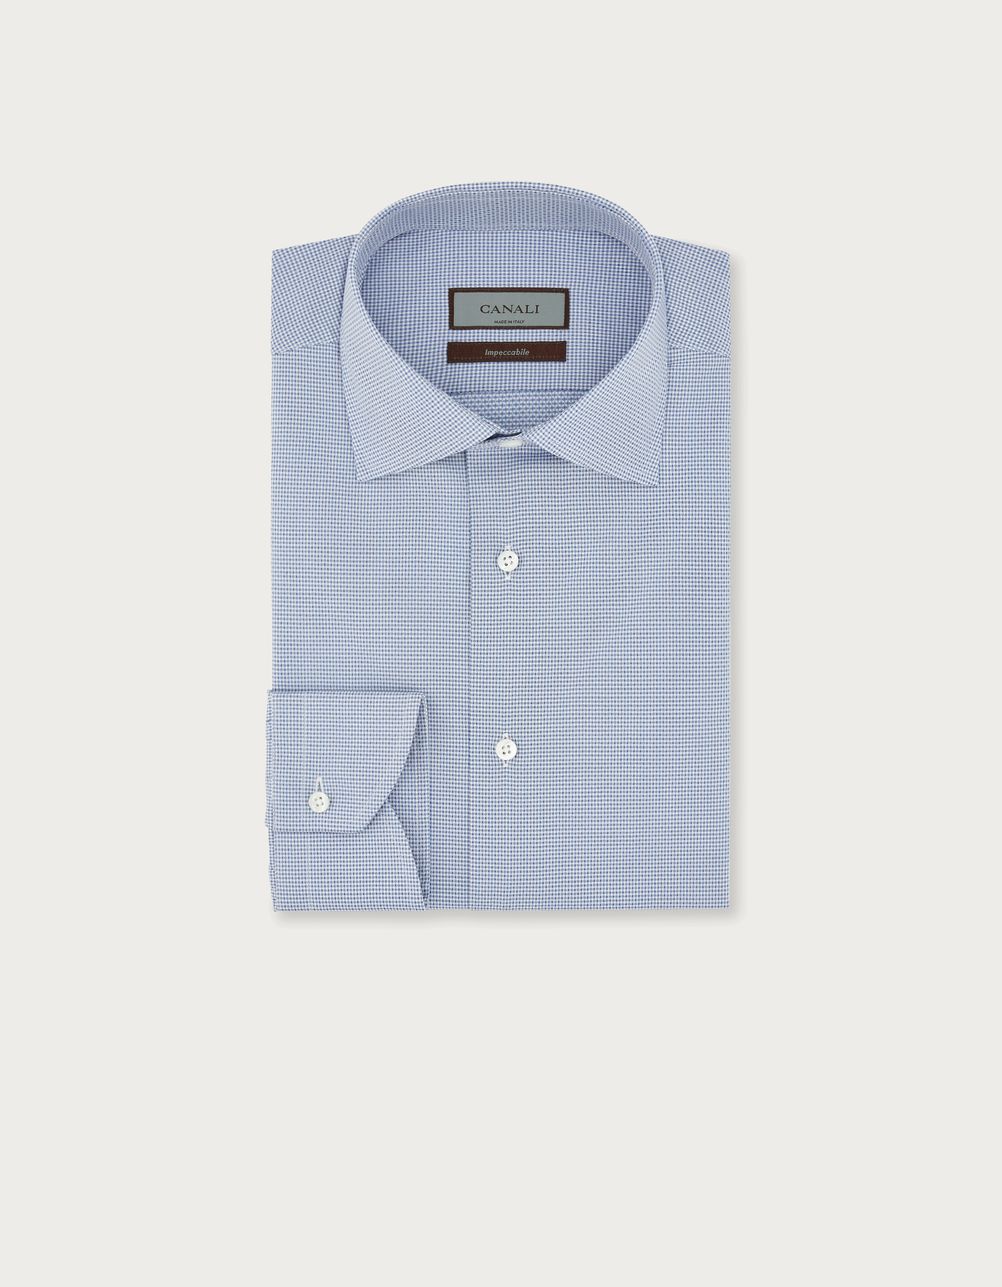 Impeccable shirt in white and blue cotton